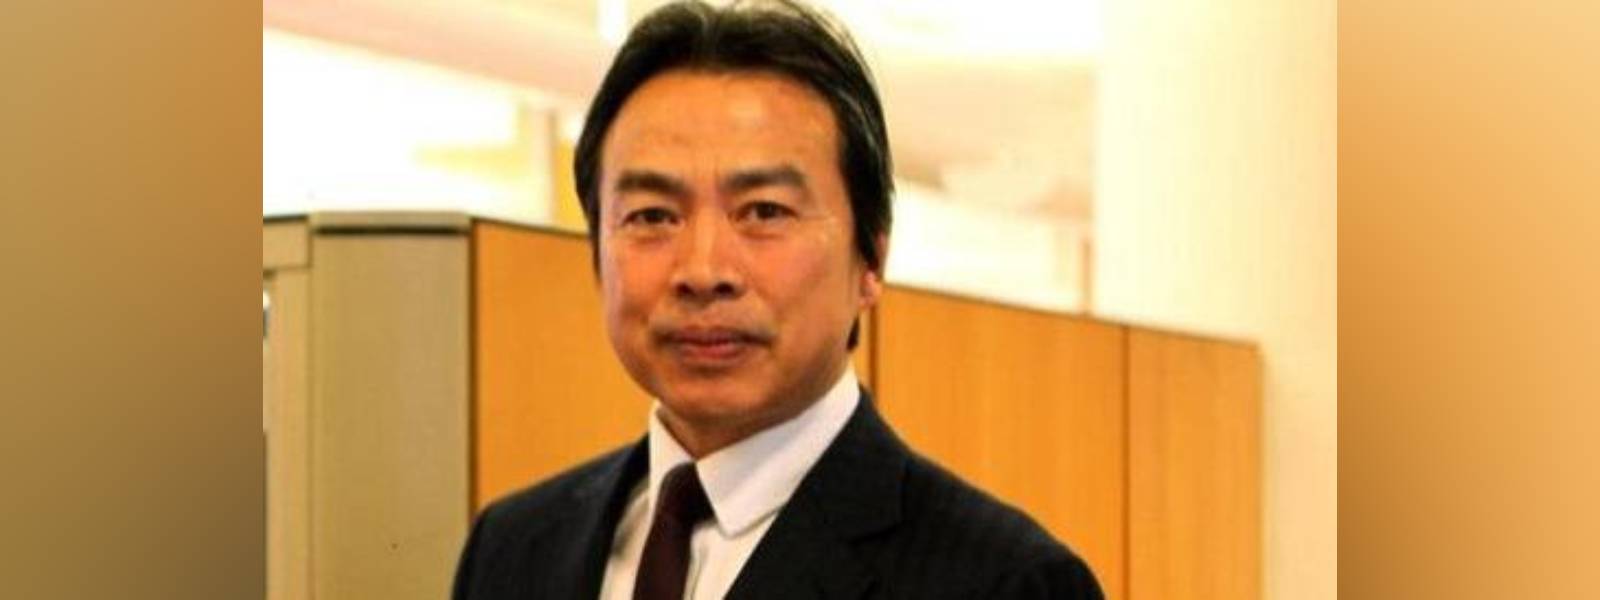 Chinese ambassador to Israel ‘found dead at home’